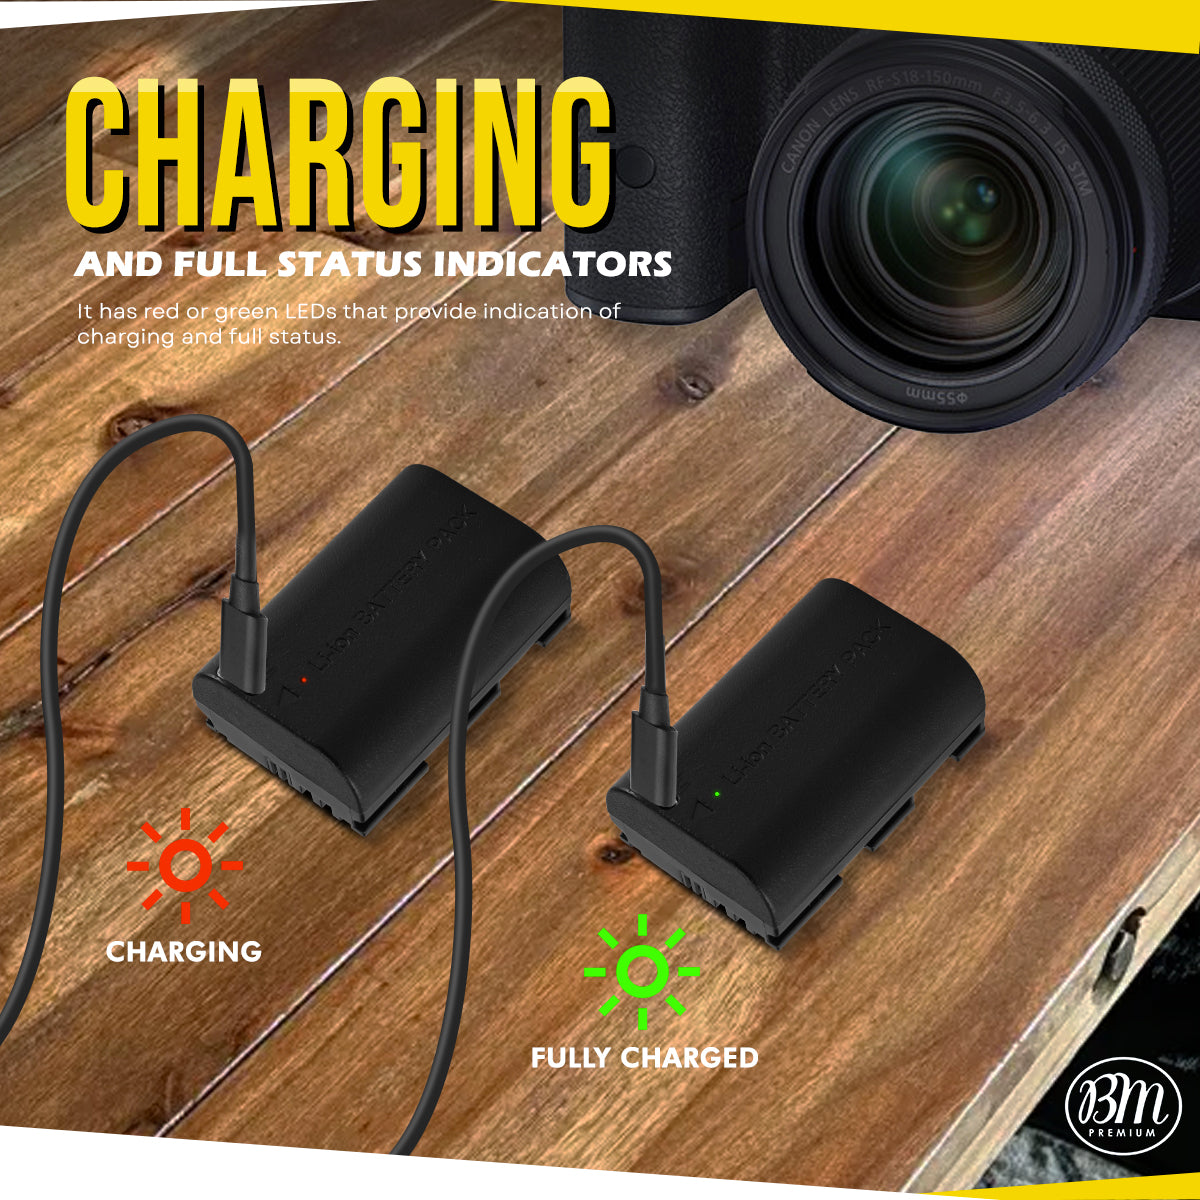 BM Premium LP-E6NH Battery with Built-in USB-C Charging Port